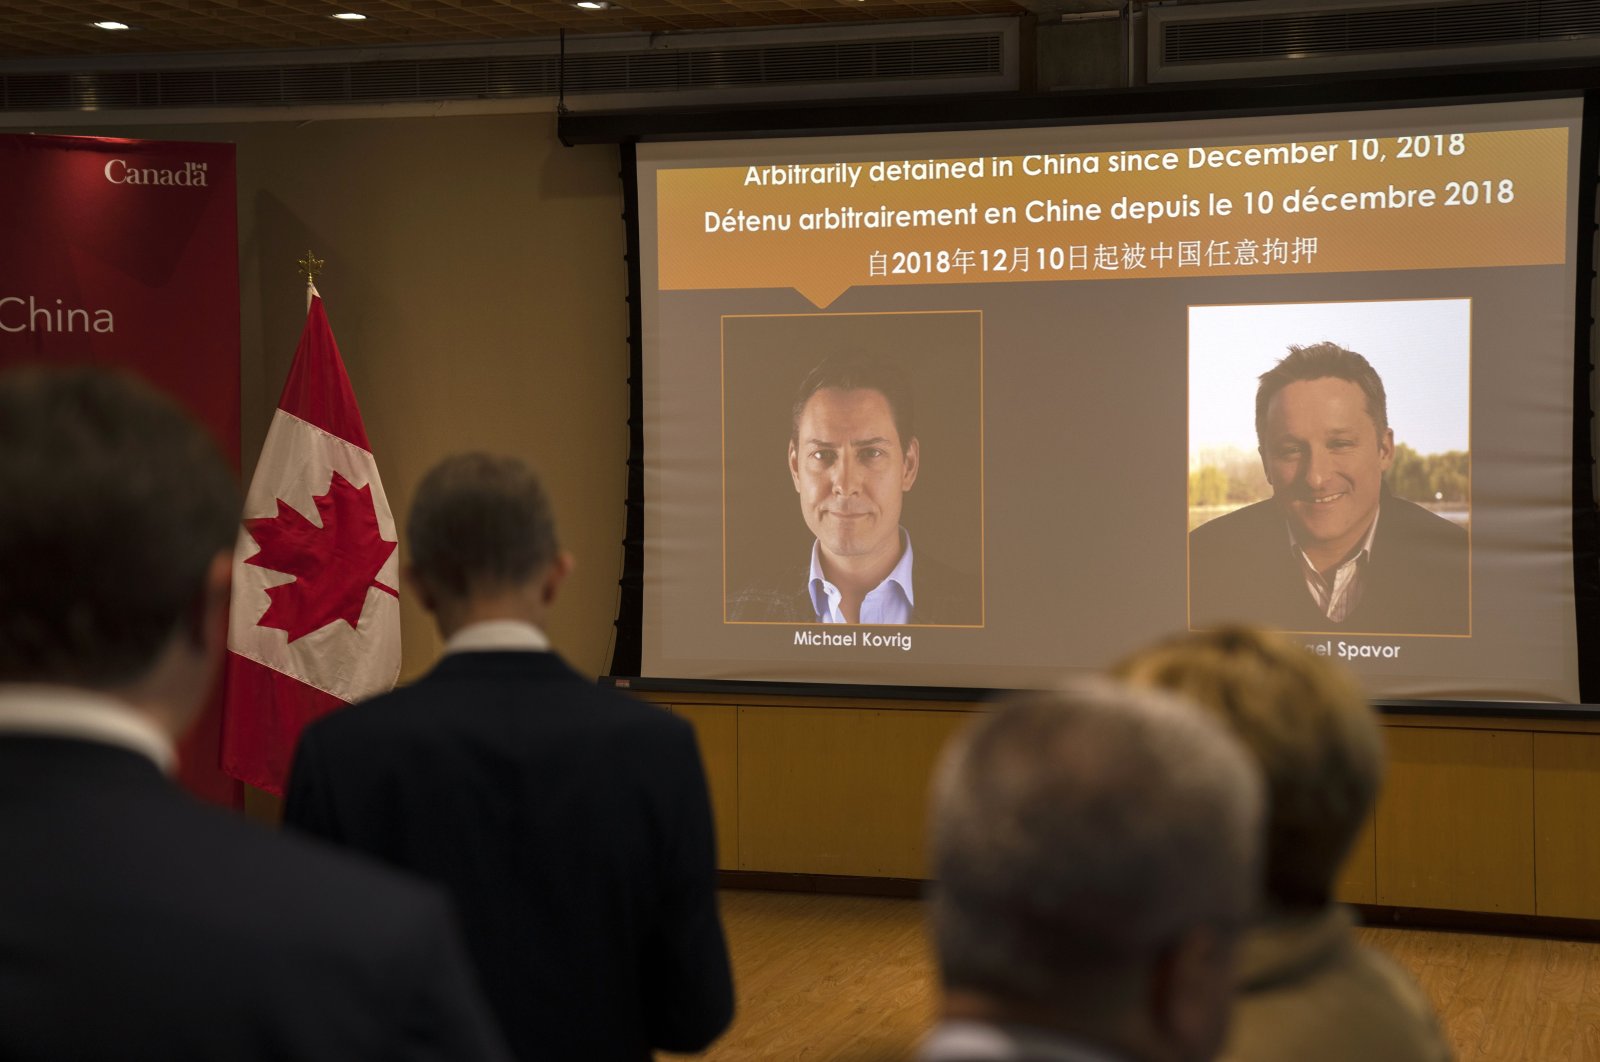 A video screen displays images of Canadians Michael Kovrig,(L), and Michael Spavor at an event held in connection with the announcement of the sentence for Spavor at the Canadian Embassy in Beijing, China, Aug. 11, 2021. (AP Photo)